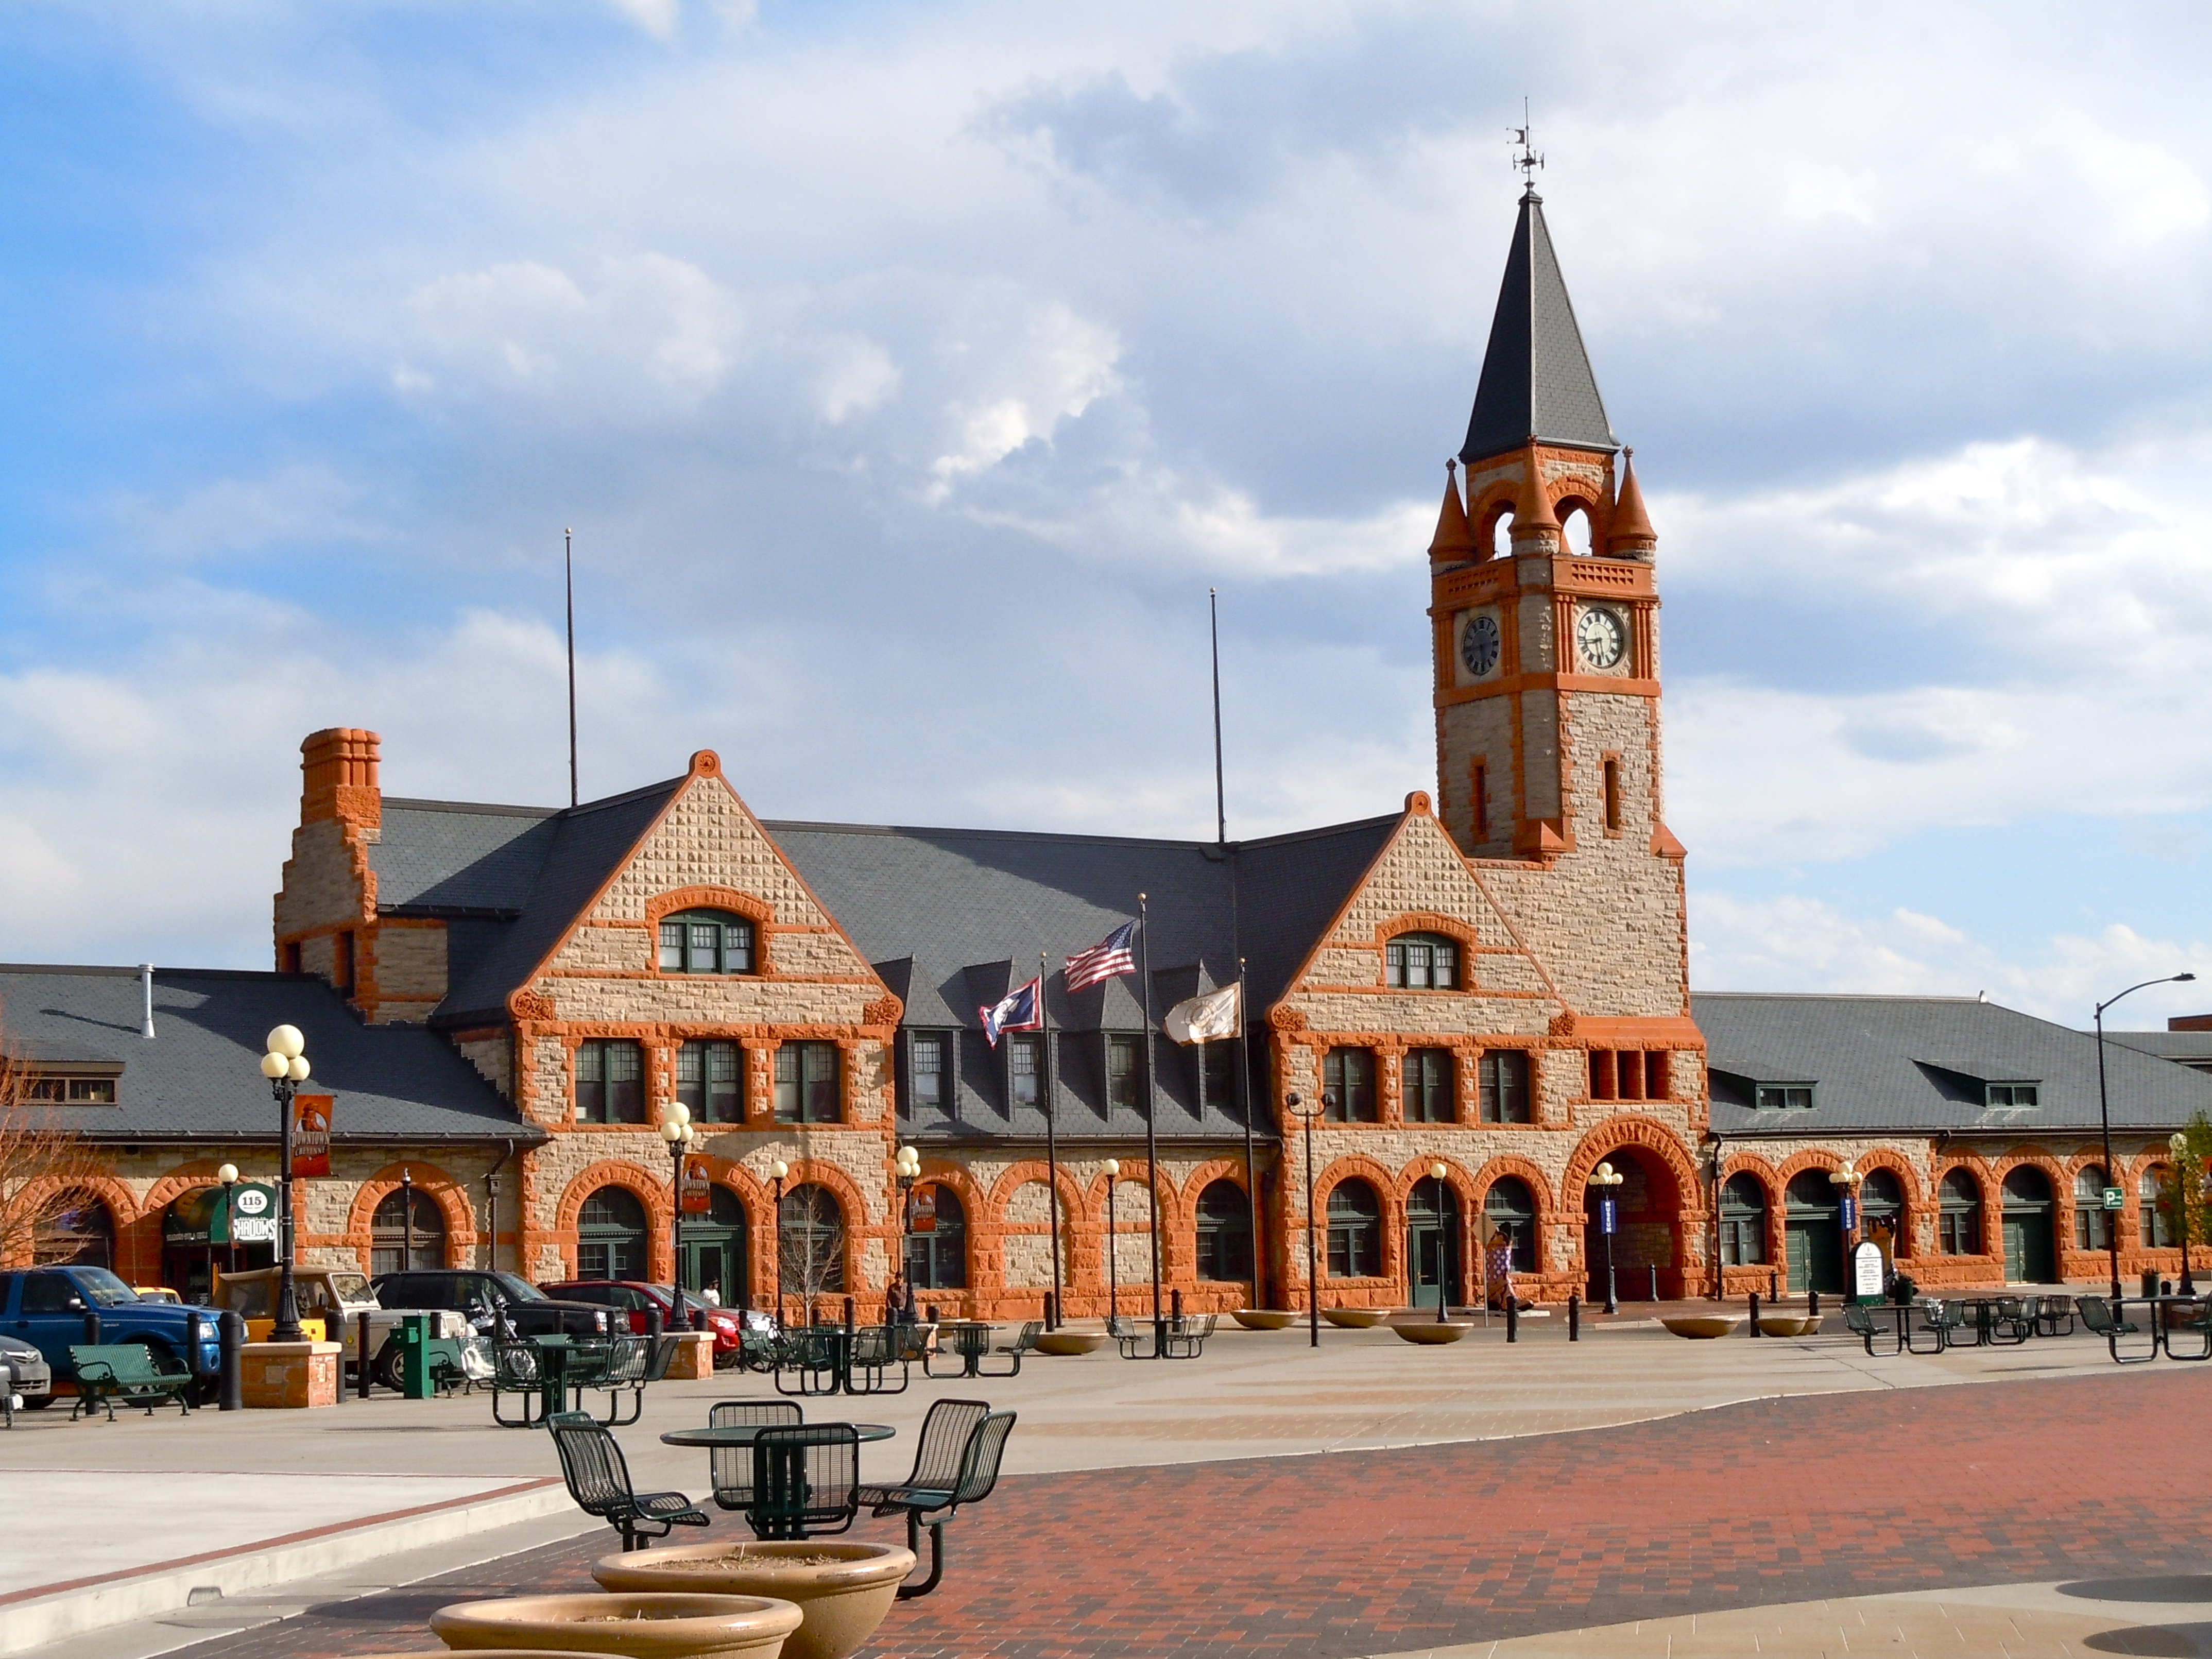 The Union Pacific Railroad Depot (1889) has been restored as the Cheyenne Depot Museum.